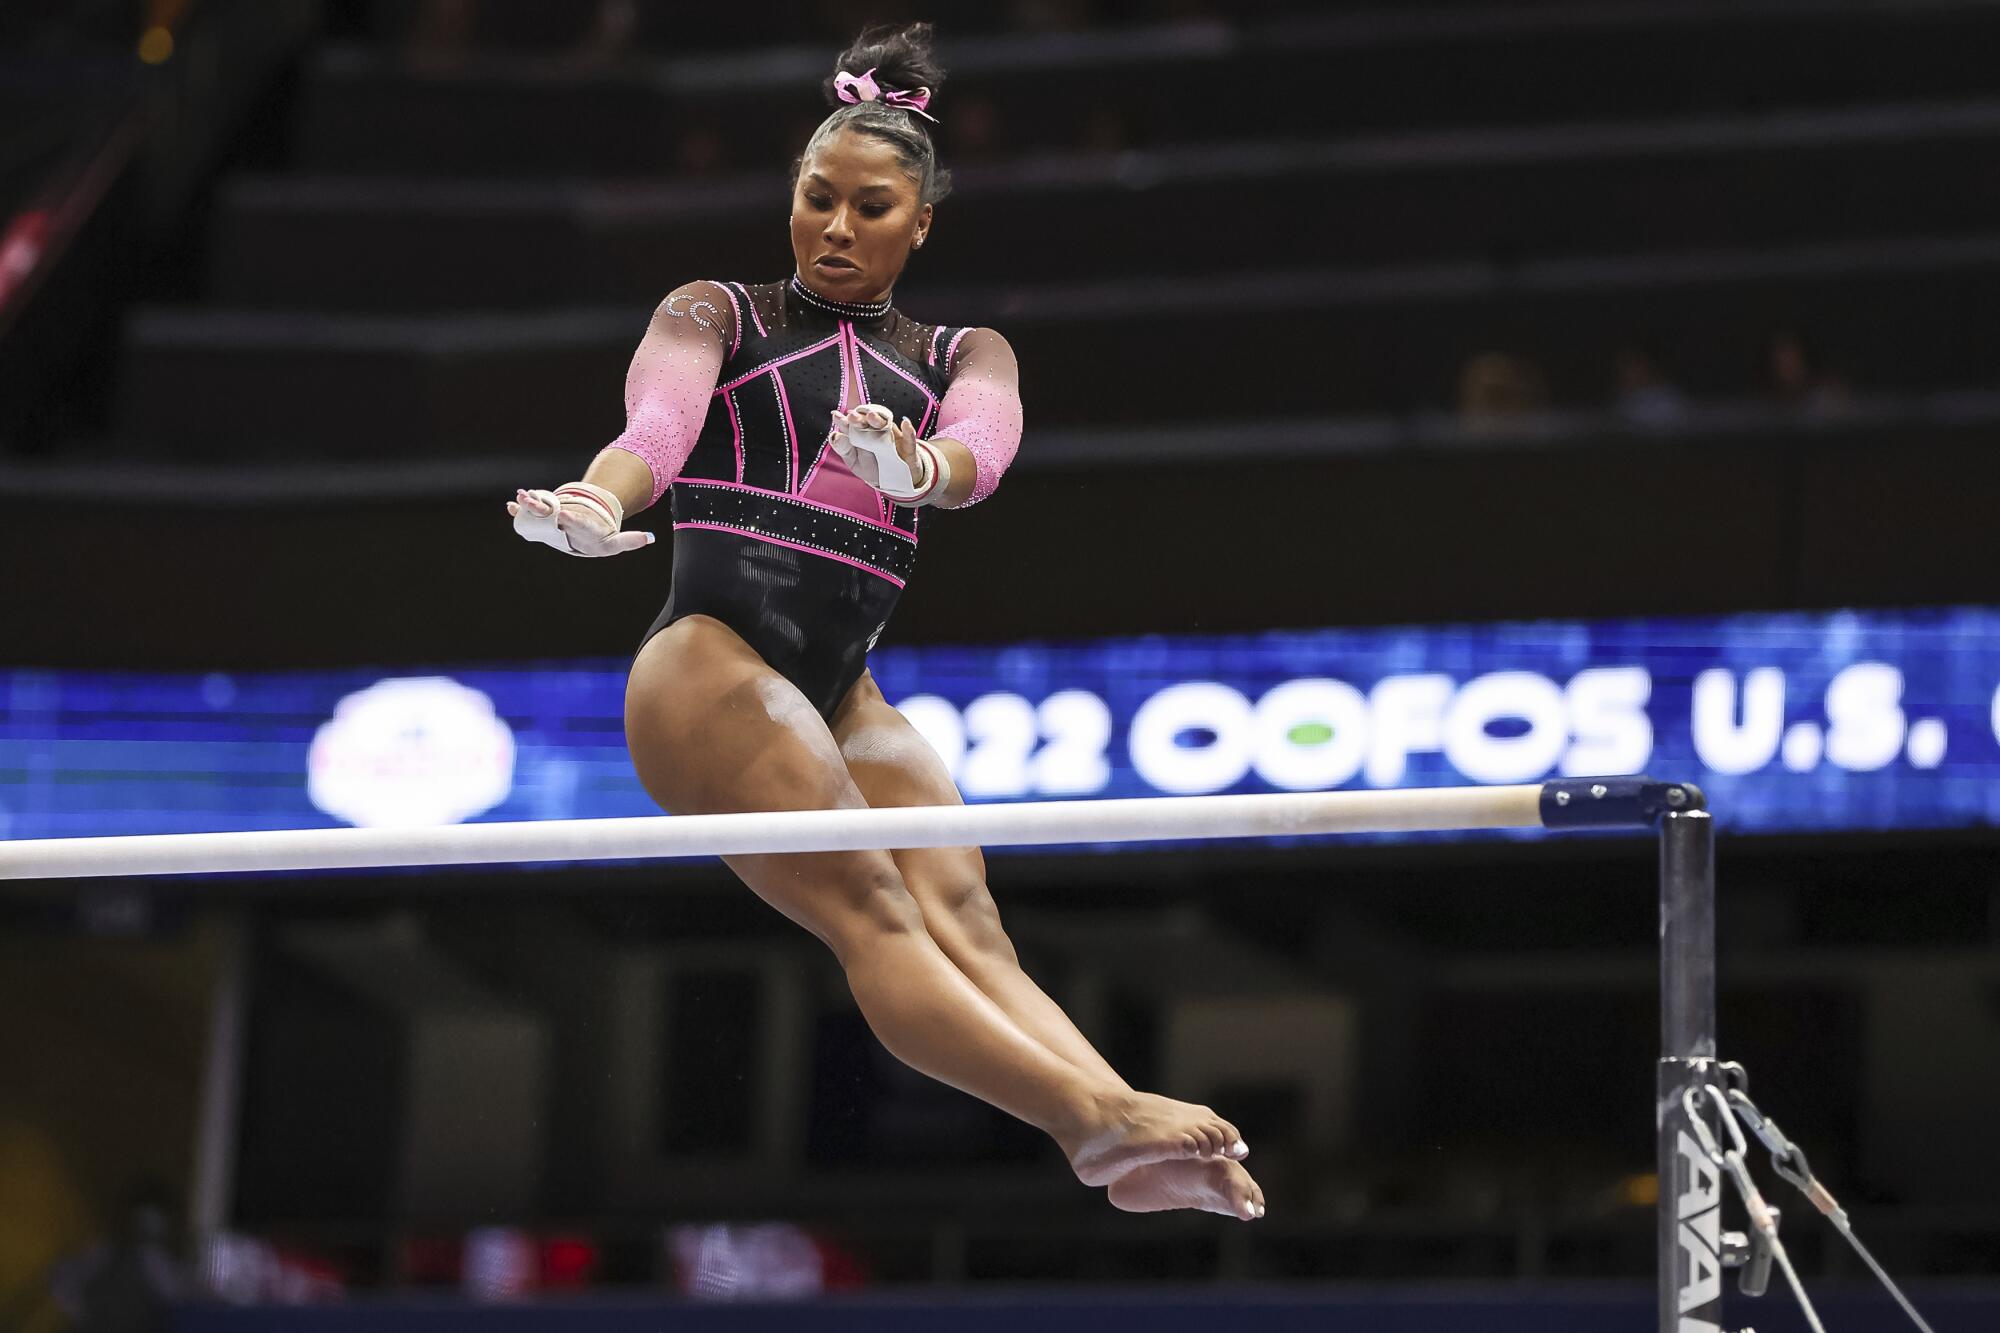 Jordan Chiles competes on the uneven bars during the U.S. Gymnastics Championships in August.